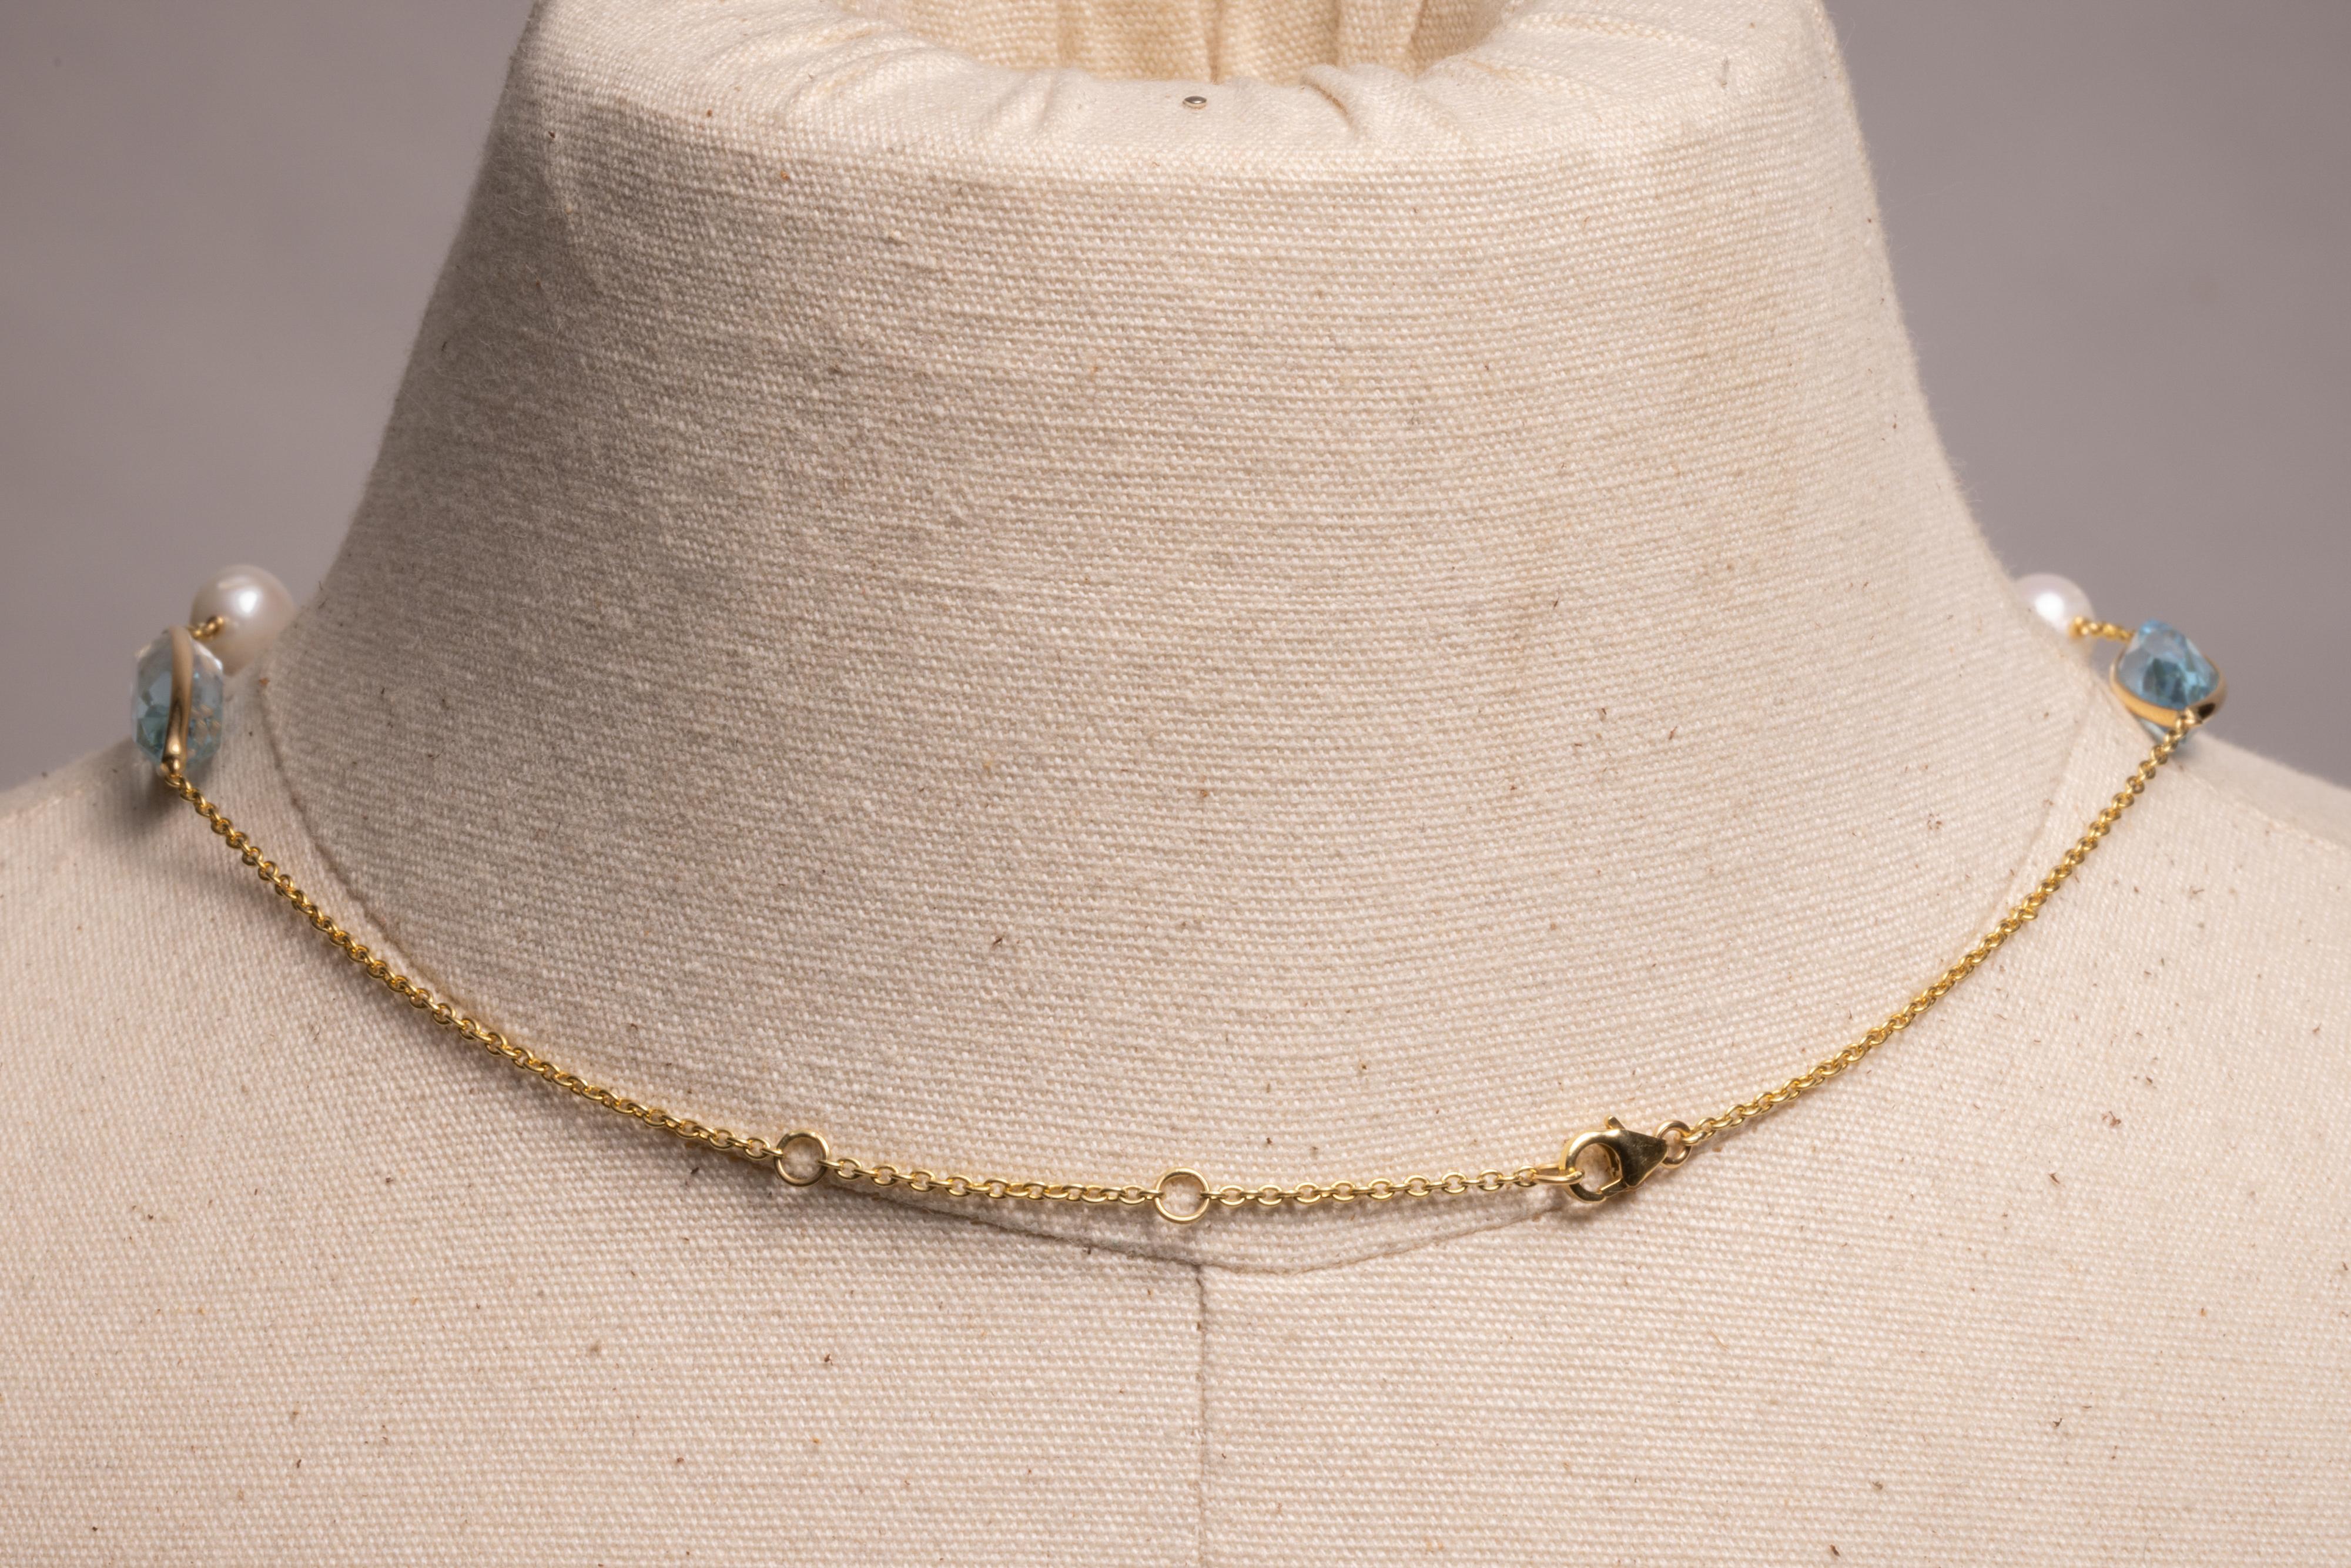 A stunning necklace with five faceted marquise aquamarines bordered in gold, interspersed with fresh water pearls with 18K gold chain in between.  It has optional rings at the back to adjust the length from between 16-18